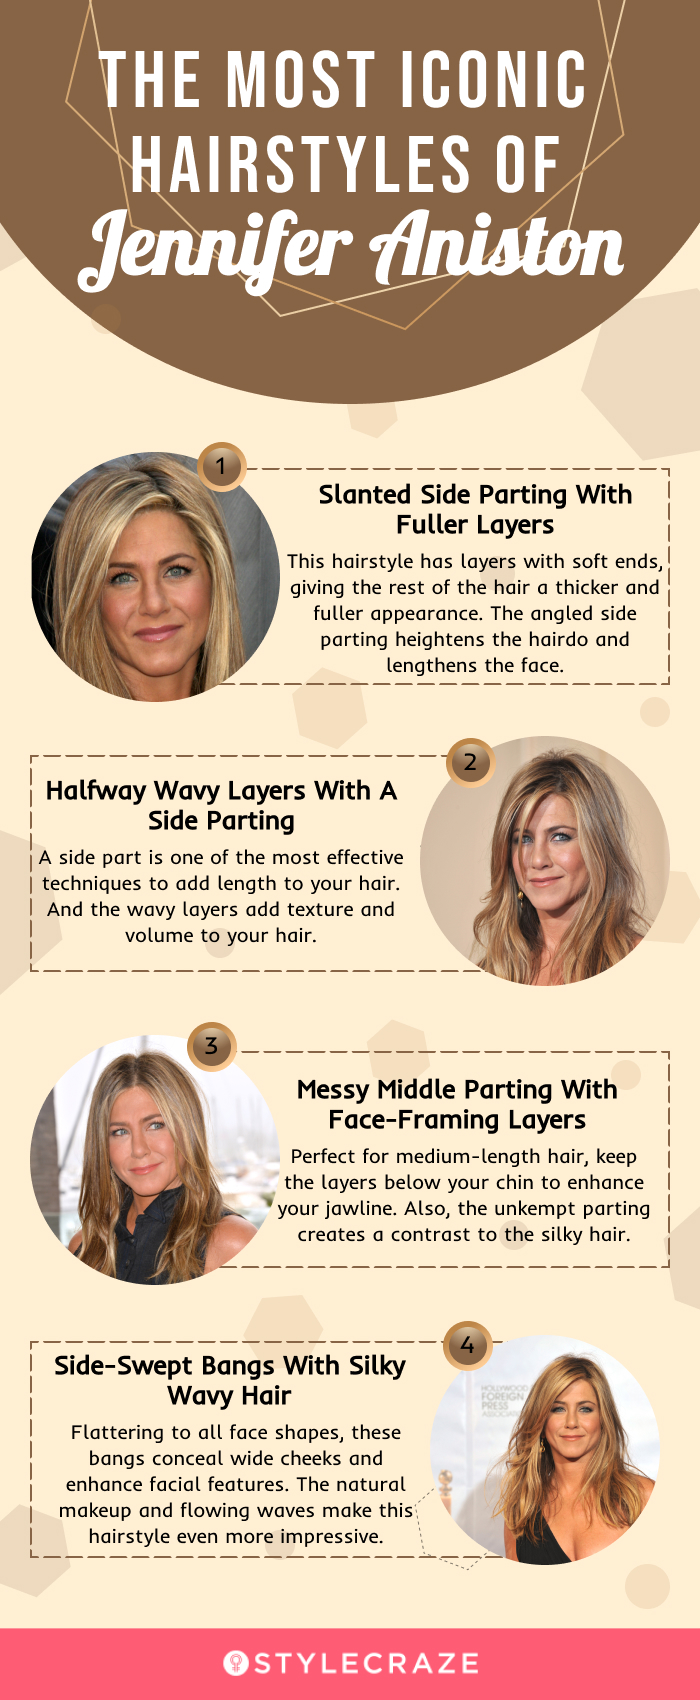 the most iconic hairstyles of jennifer aniston (infographic)